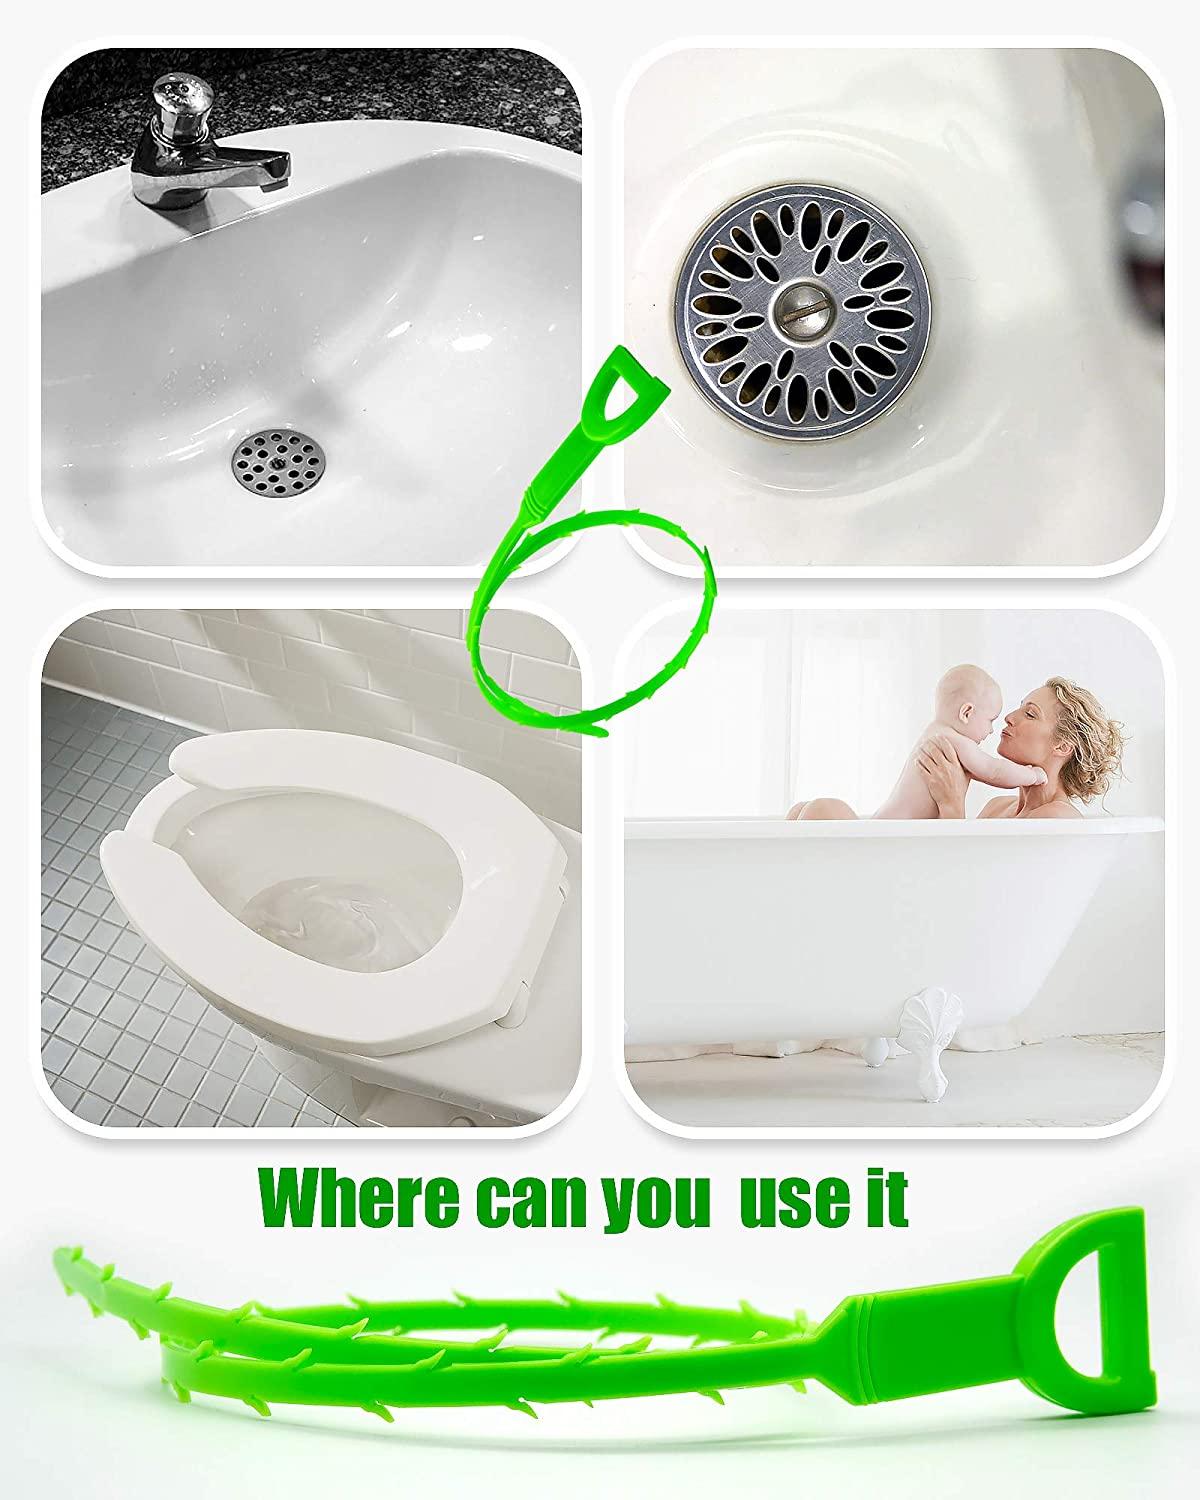 25 Inch Hair Drain Clog Remover Cleaning Tool. Sink Snake Drain Hair Remover  for